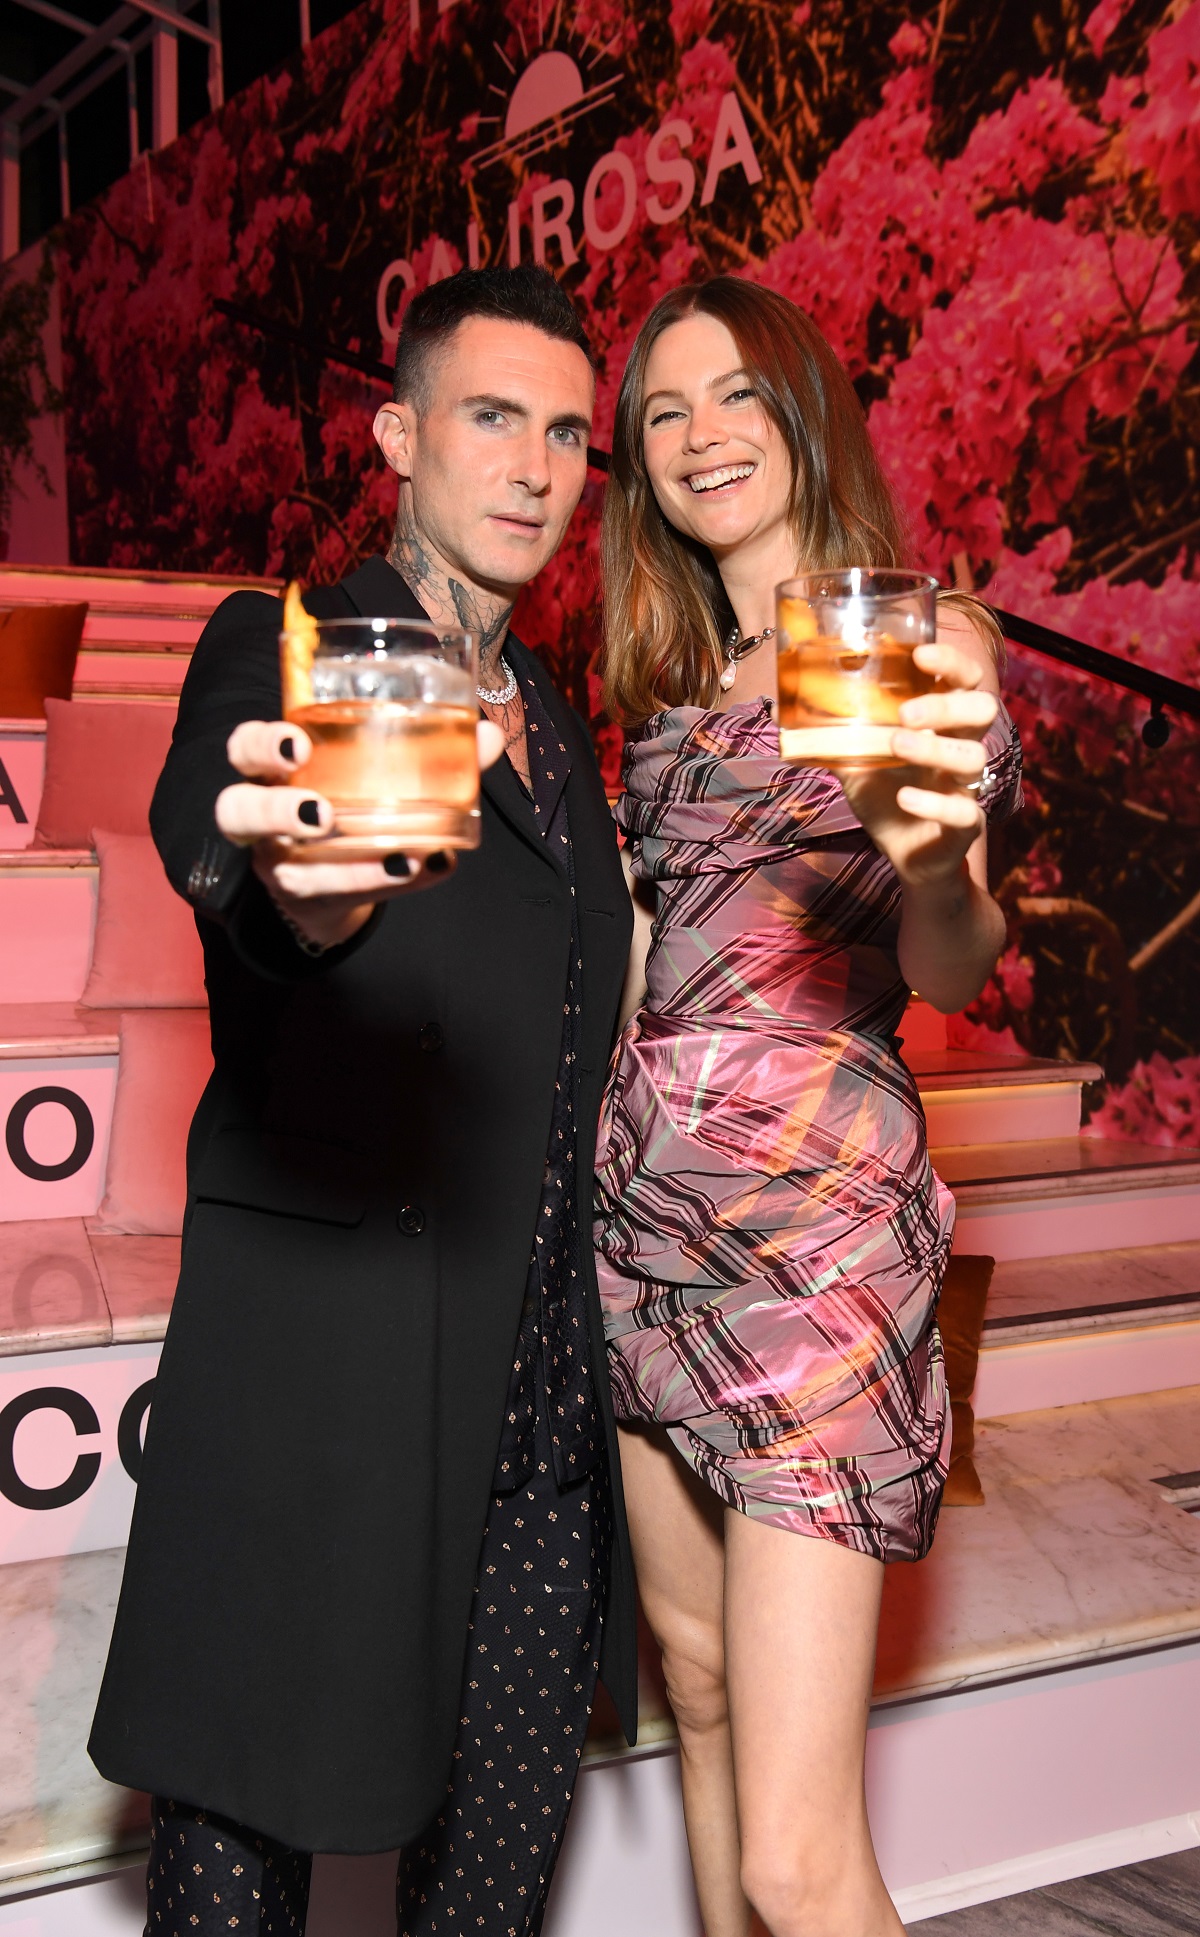 Co-founders Adam Levine and Behati Prinsloo, host their CALIROSA Tequila launch party